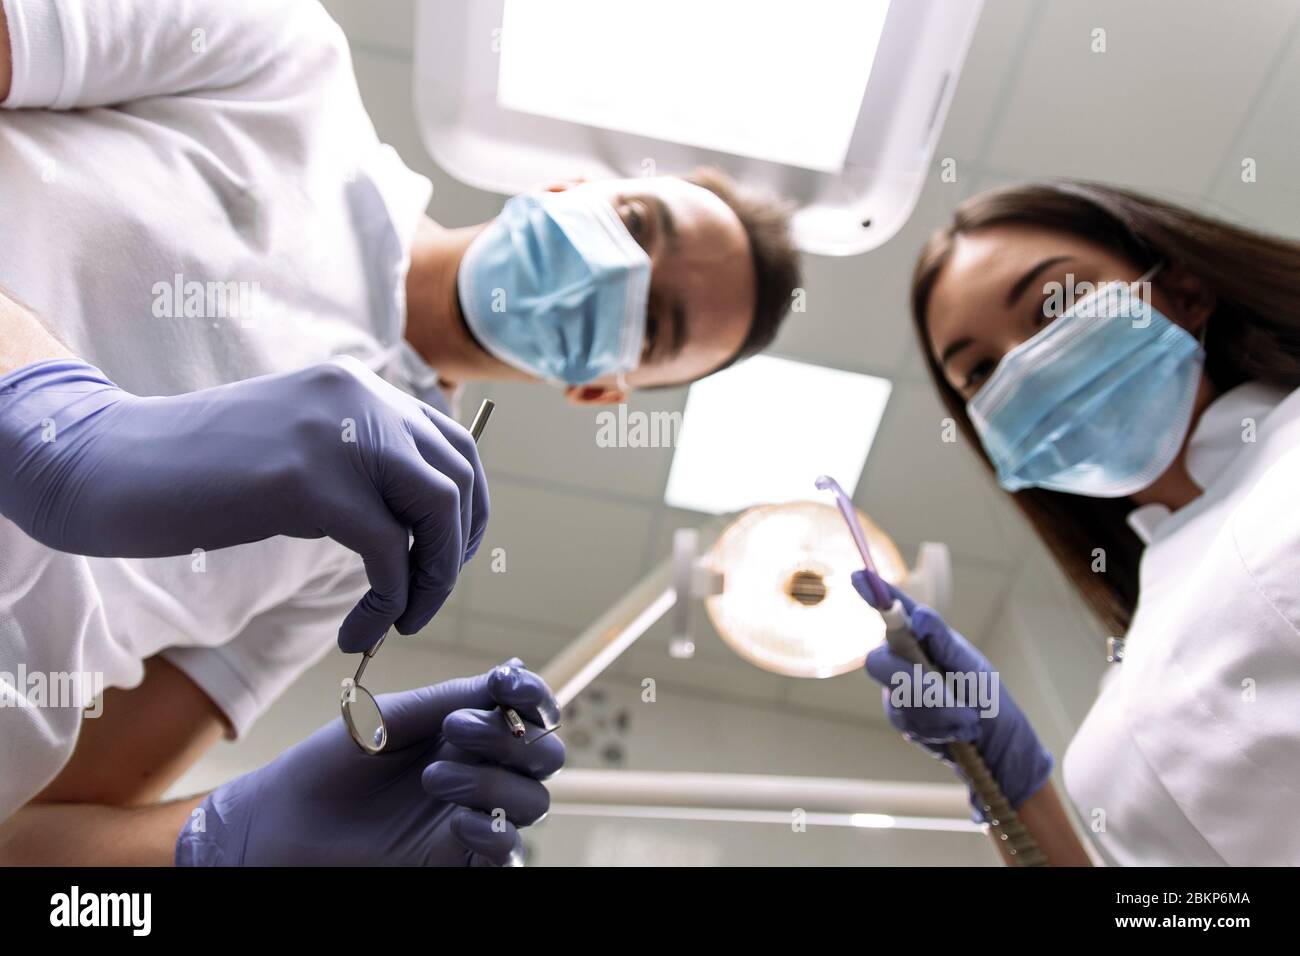 The dentist and assistant bent over the patient to examine the teeth, treat them or create a denture. A man and a woman are holding examination instruments, a saliva tube and looking at the patient. Stock Photo